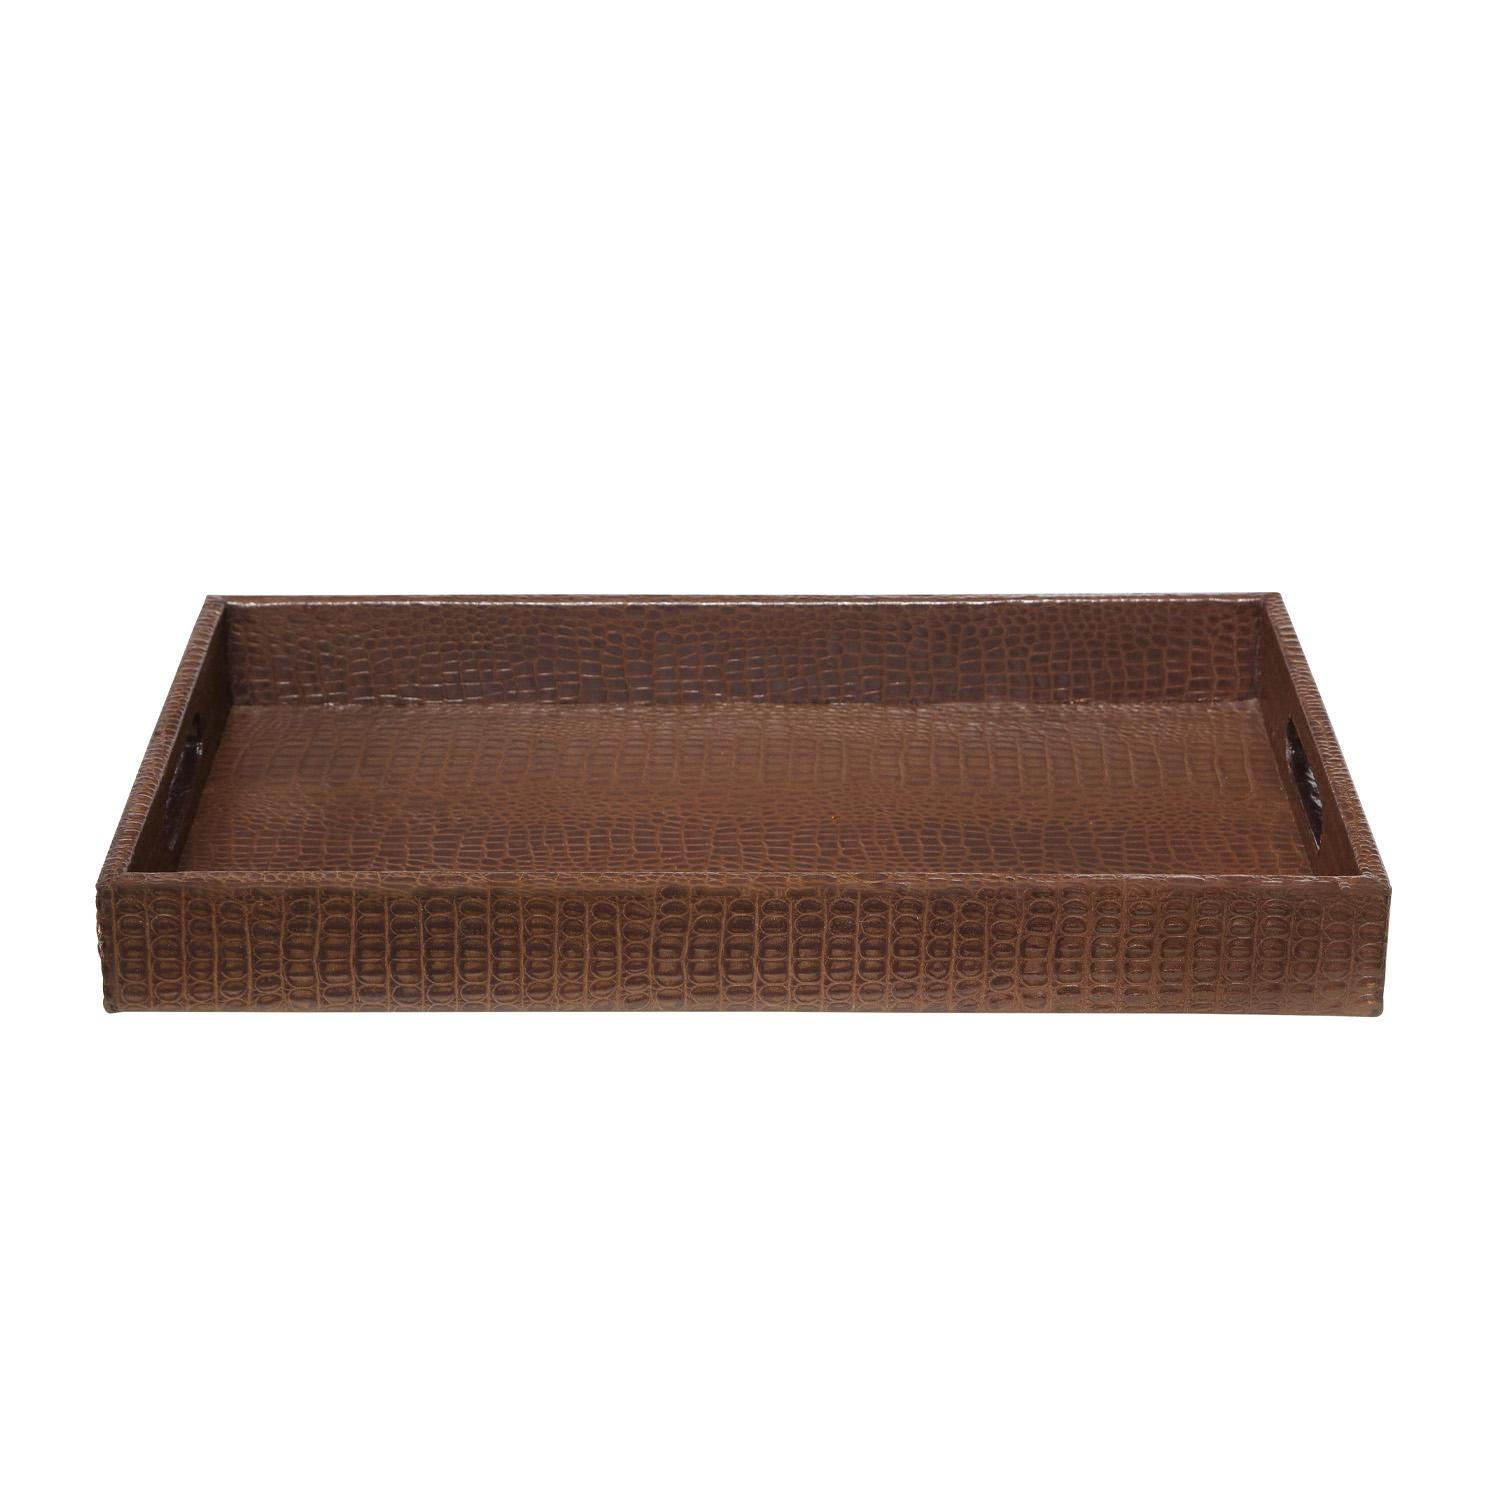 New rectangular tray with handles covered in 2 tone brown embossed alligator leather with bottom covered in brown moiré silk by Lobel Originals, American. This is beautifully made and part of a small number of unique accessories we have created.